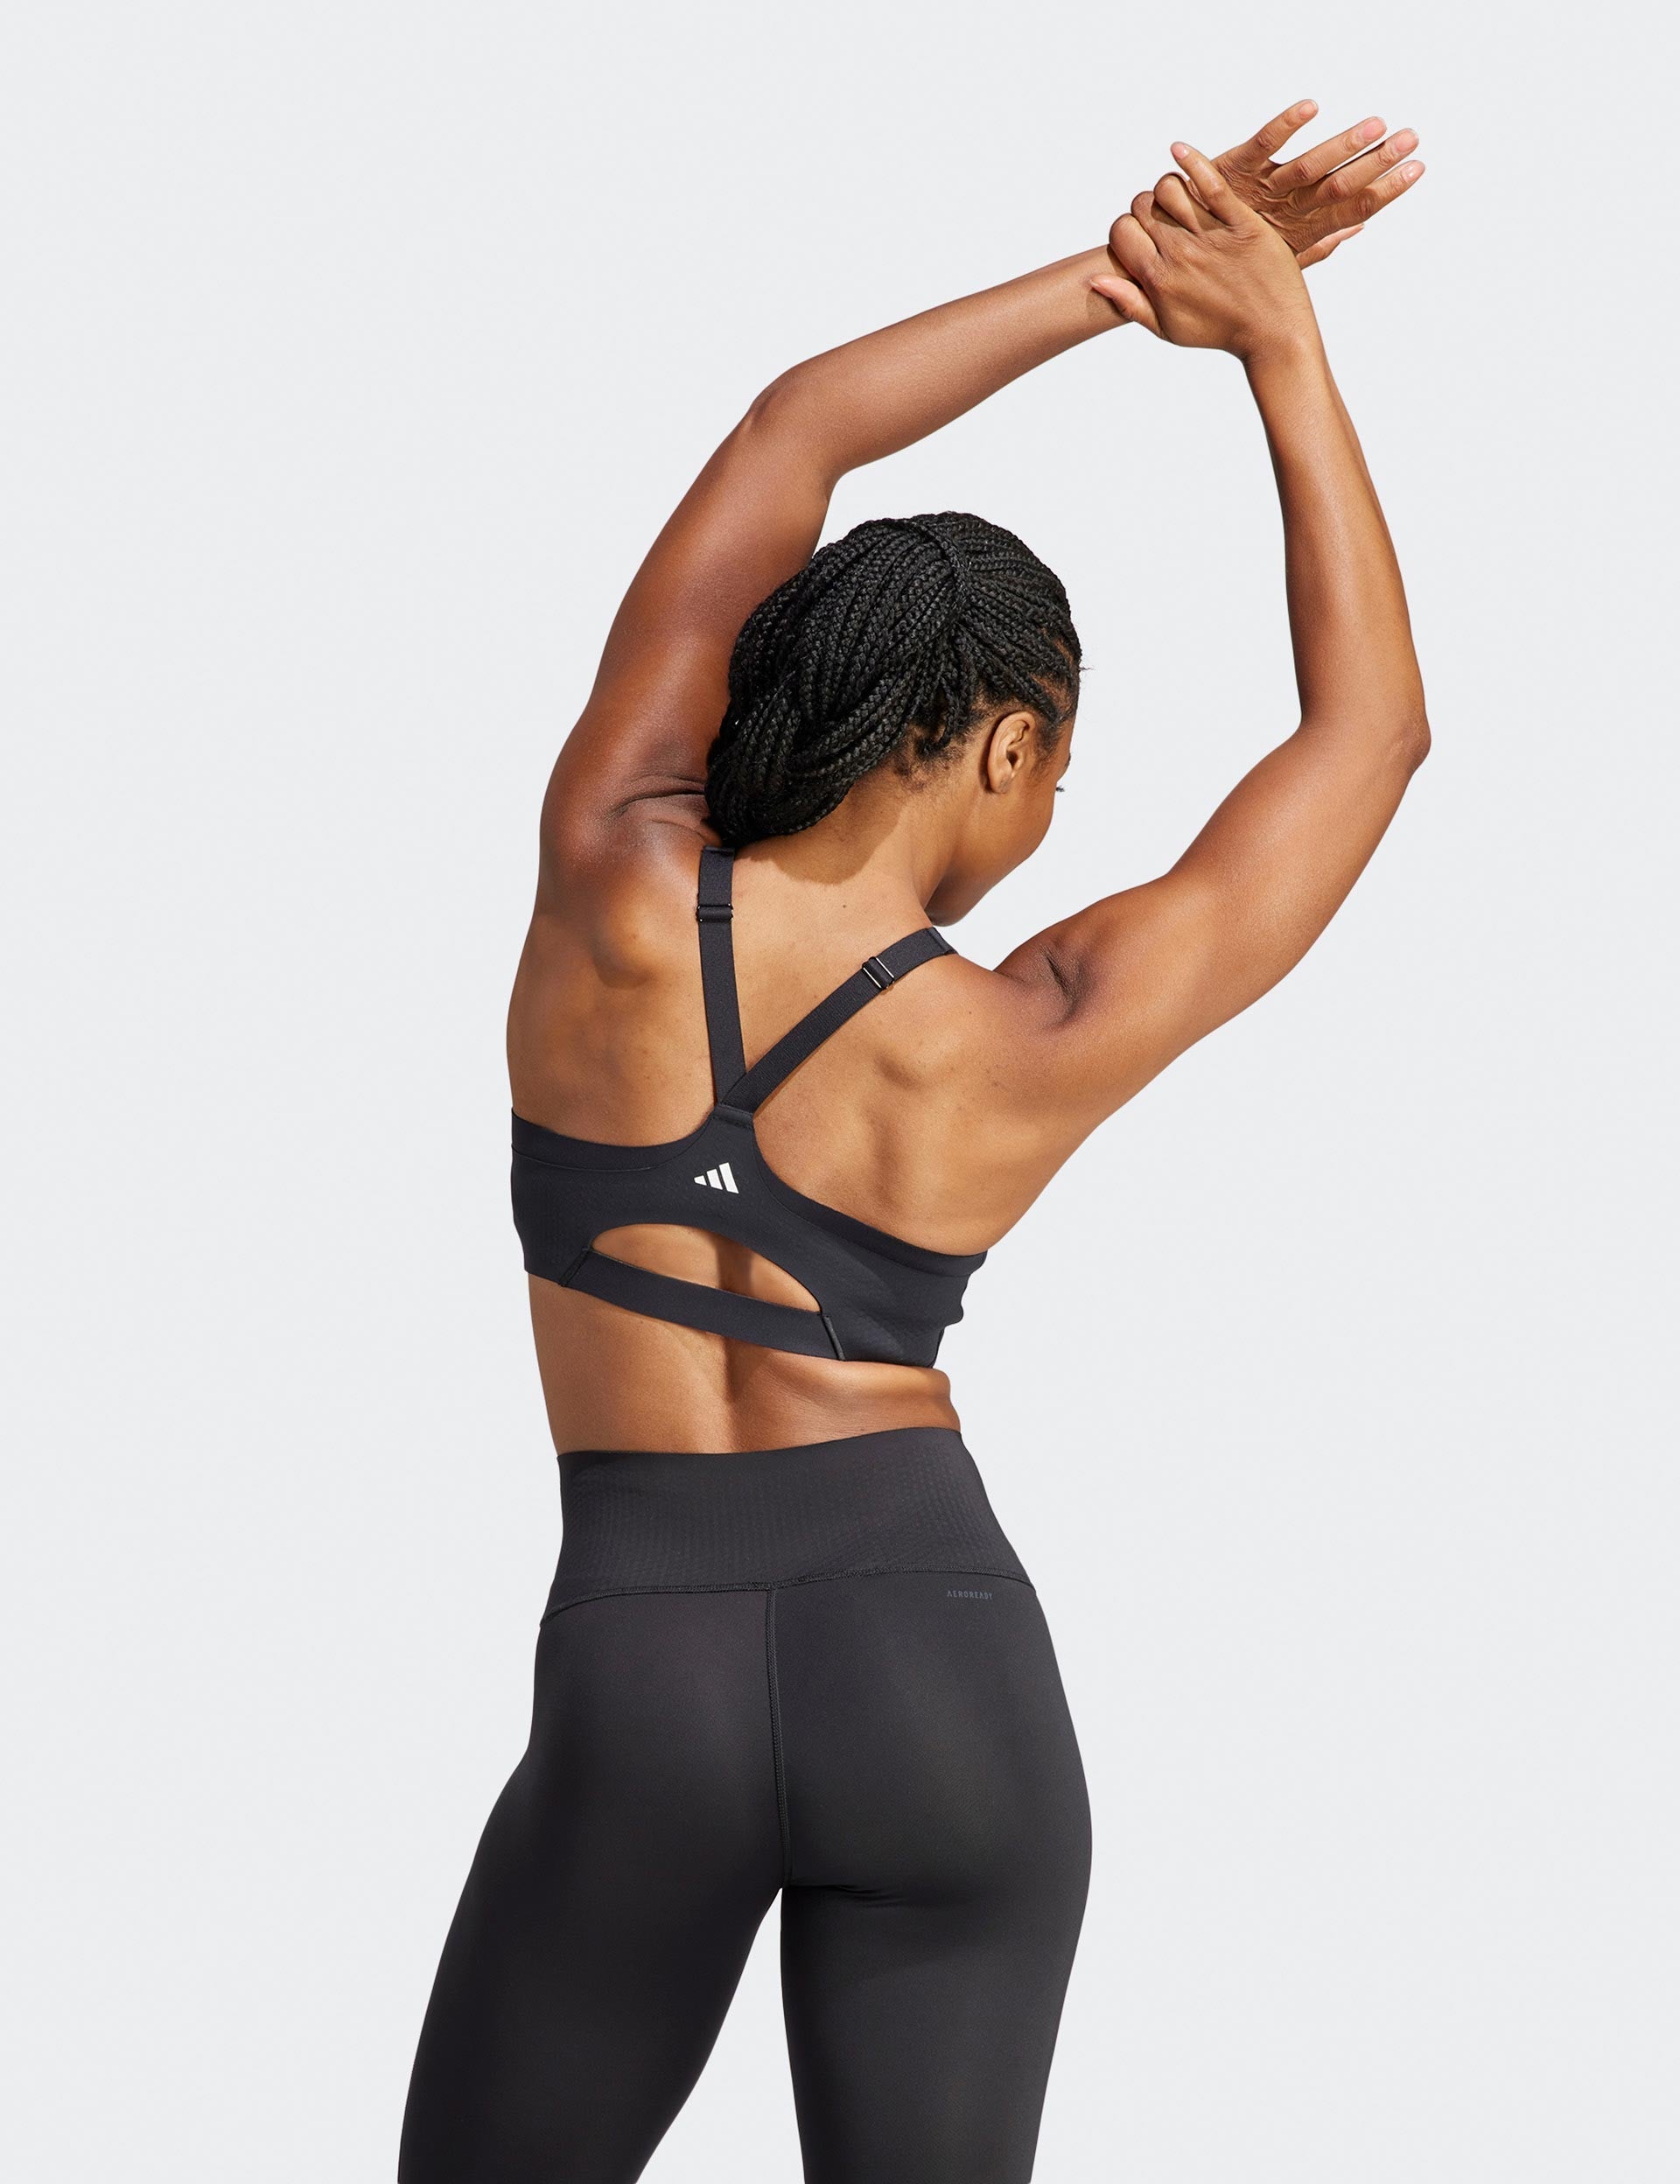 Shop Marks & Spencer Womens High Impact Sports Bra up to 85% Off